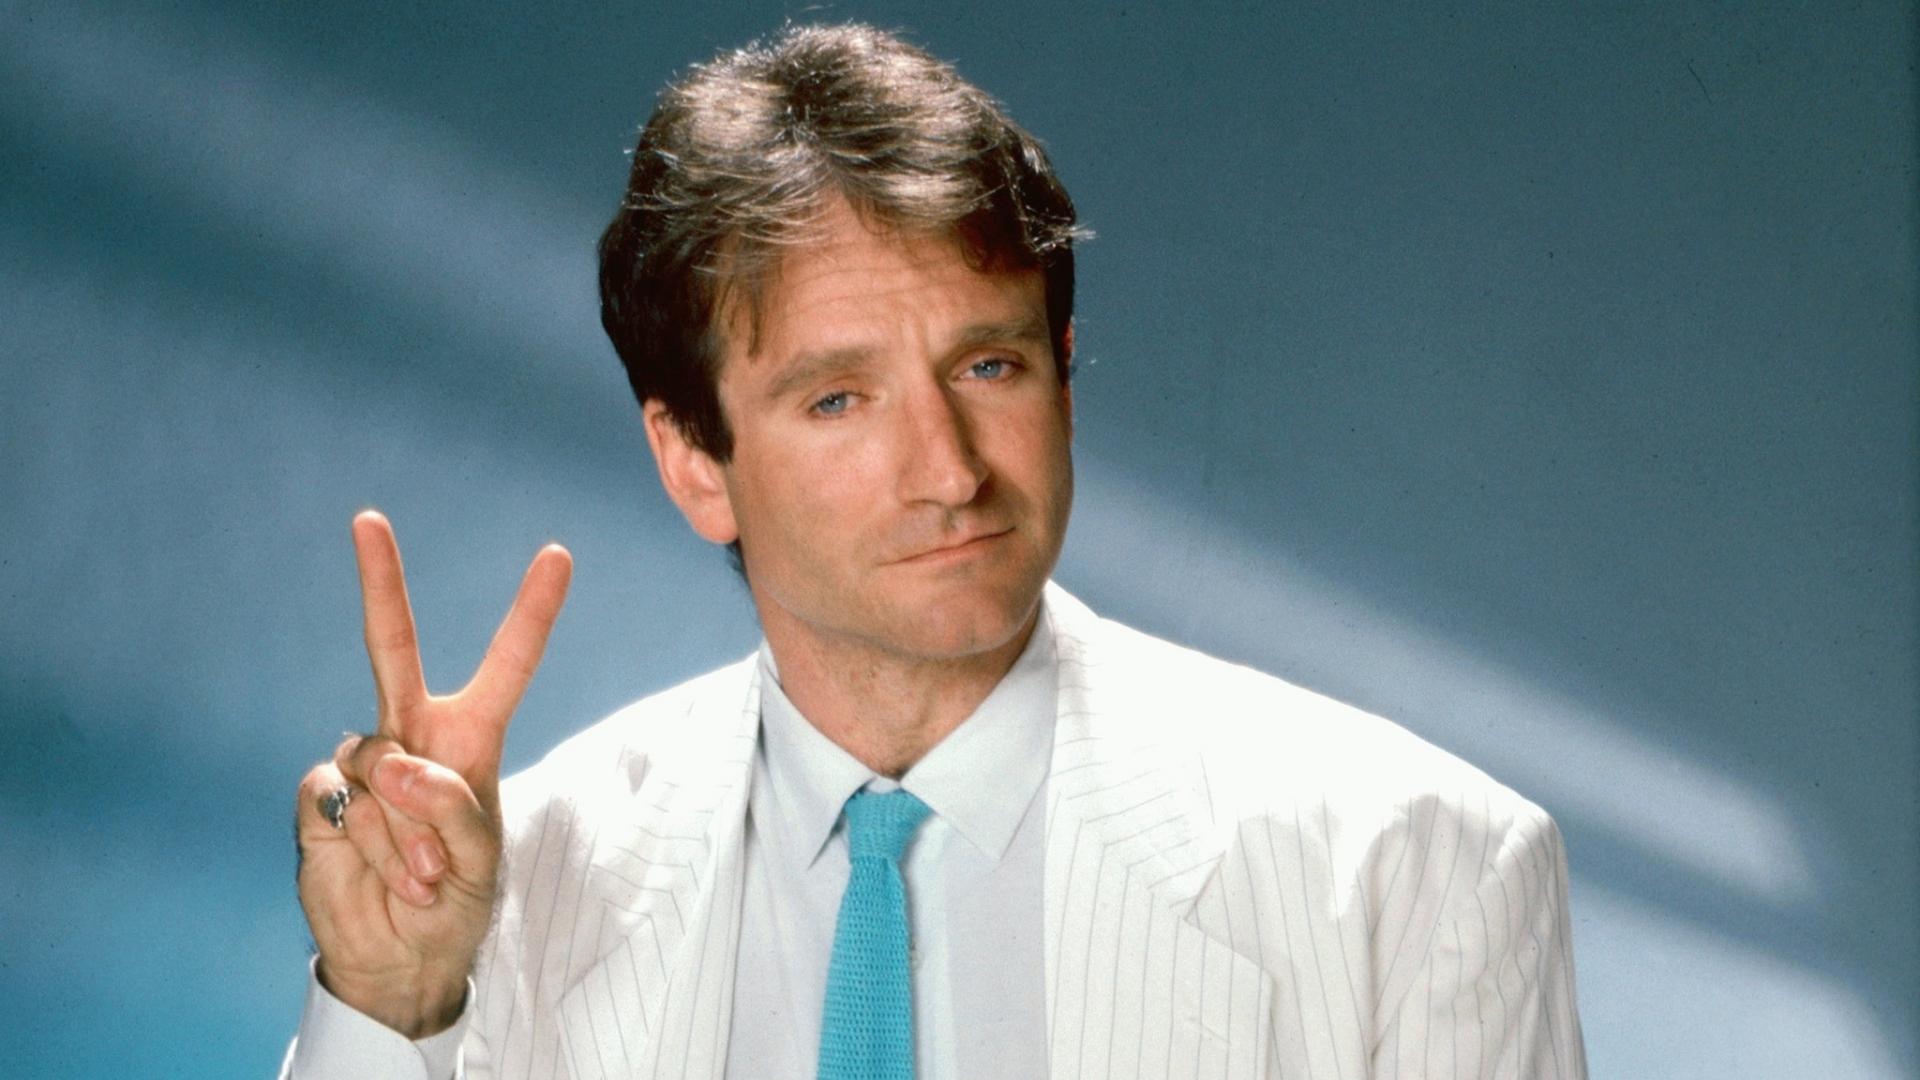 When did Robin Williams die, what was his cause of death and what did